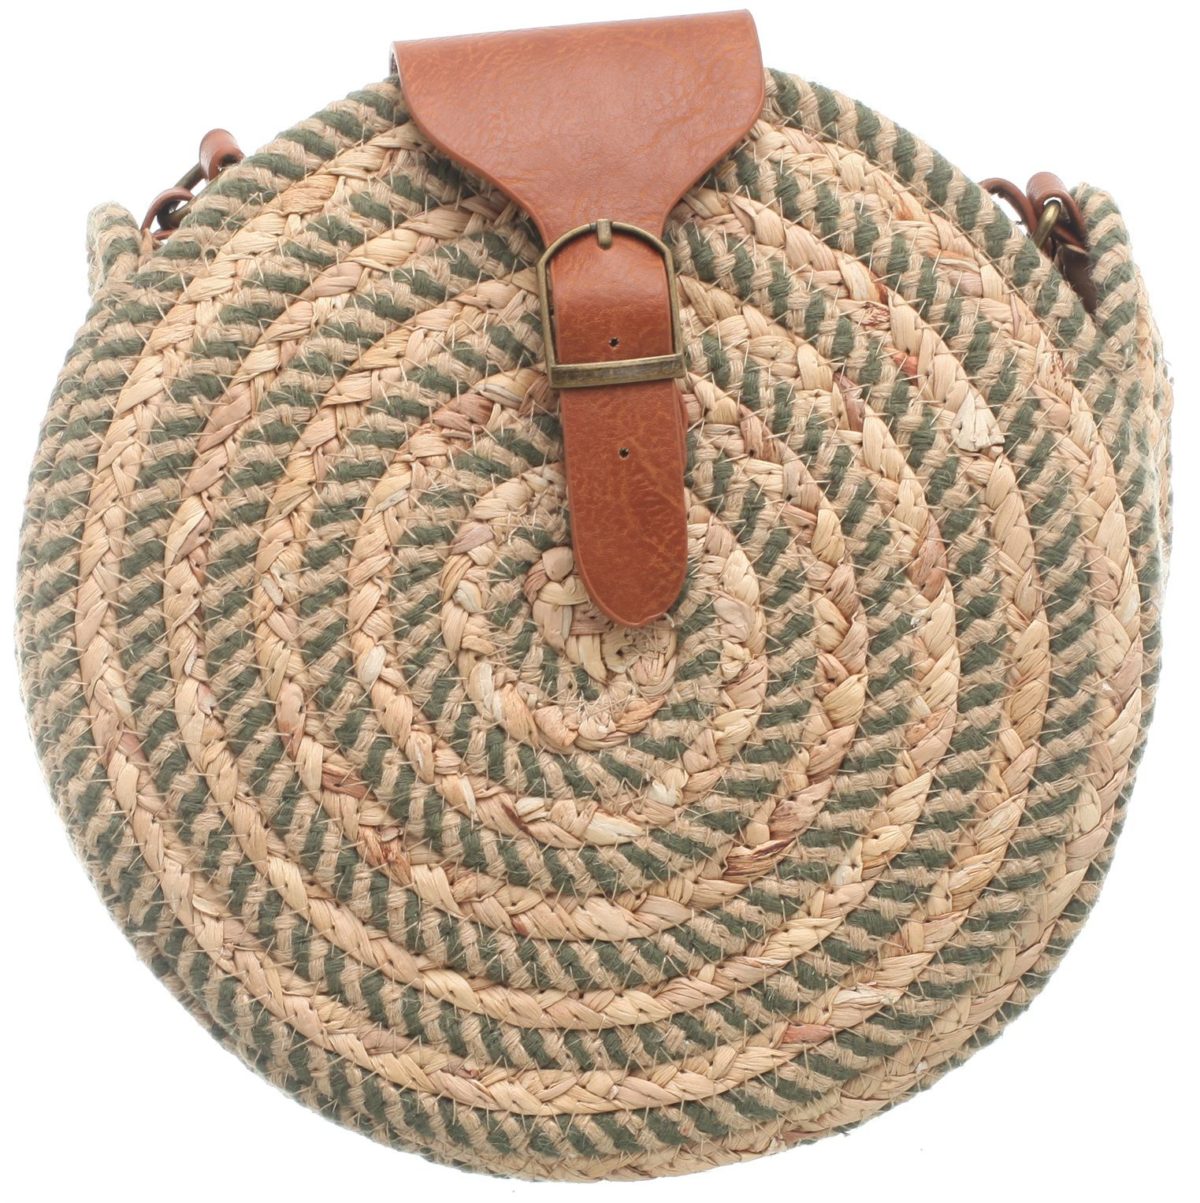 Round woven bag, brown front buckle and long brown strap